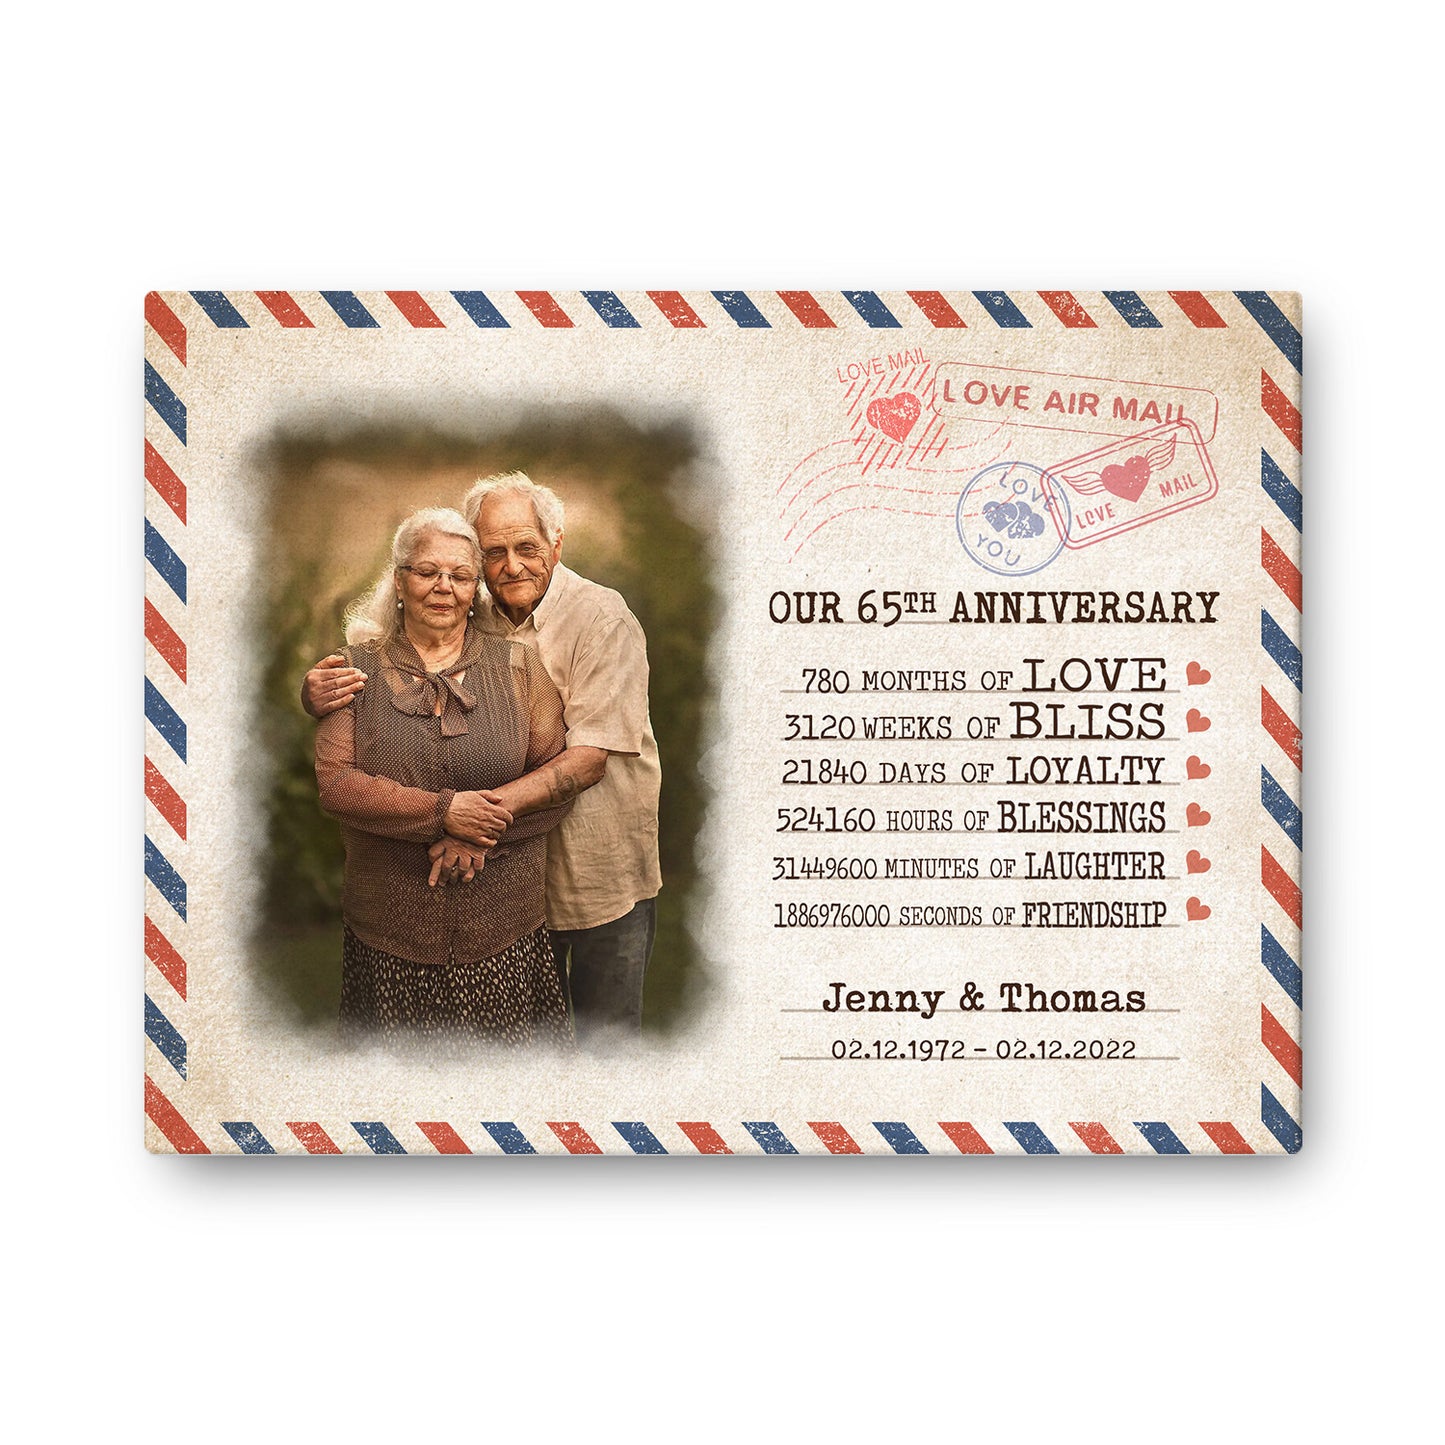 Our 65th Anniversary Letter Valentine Gift Personalized Canvas